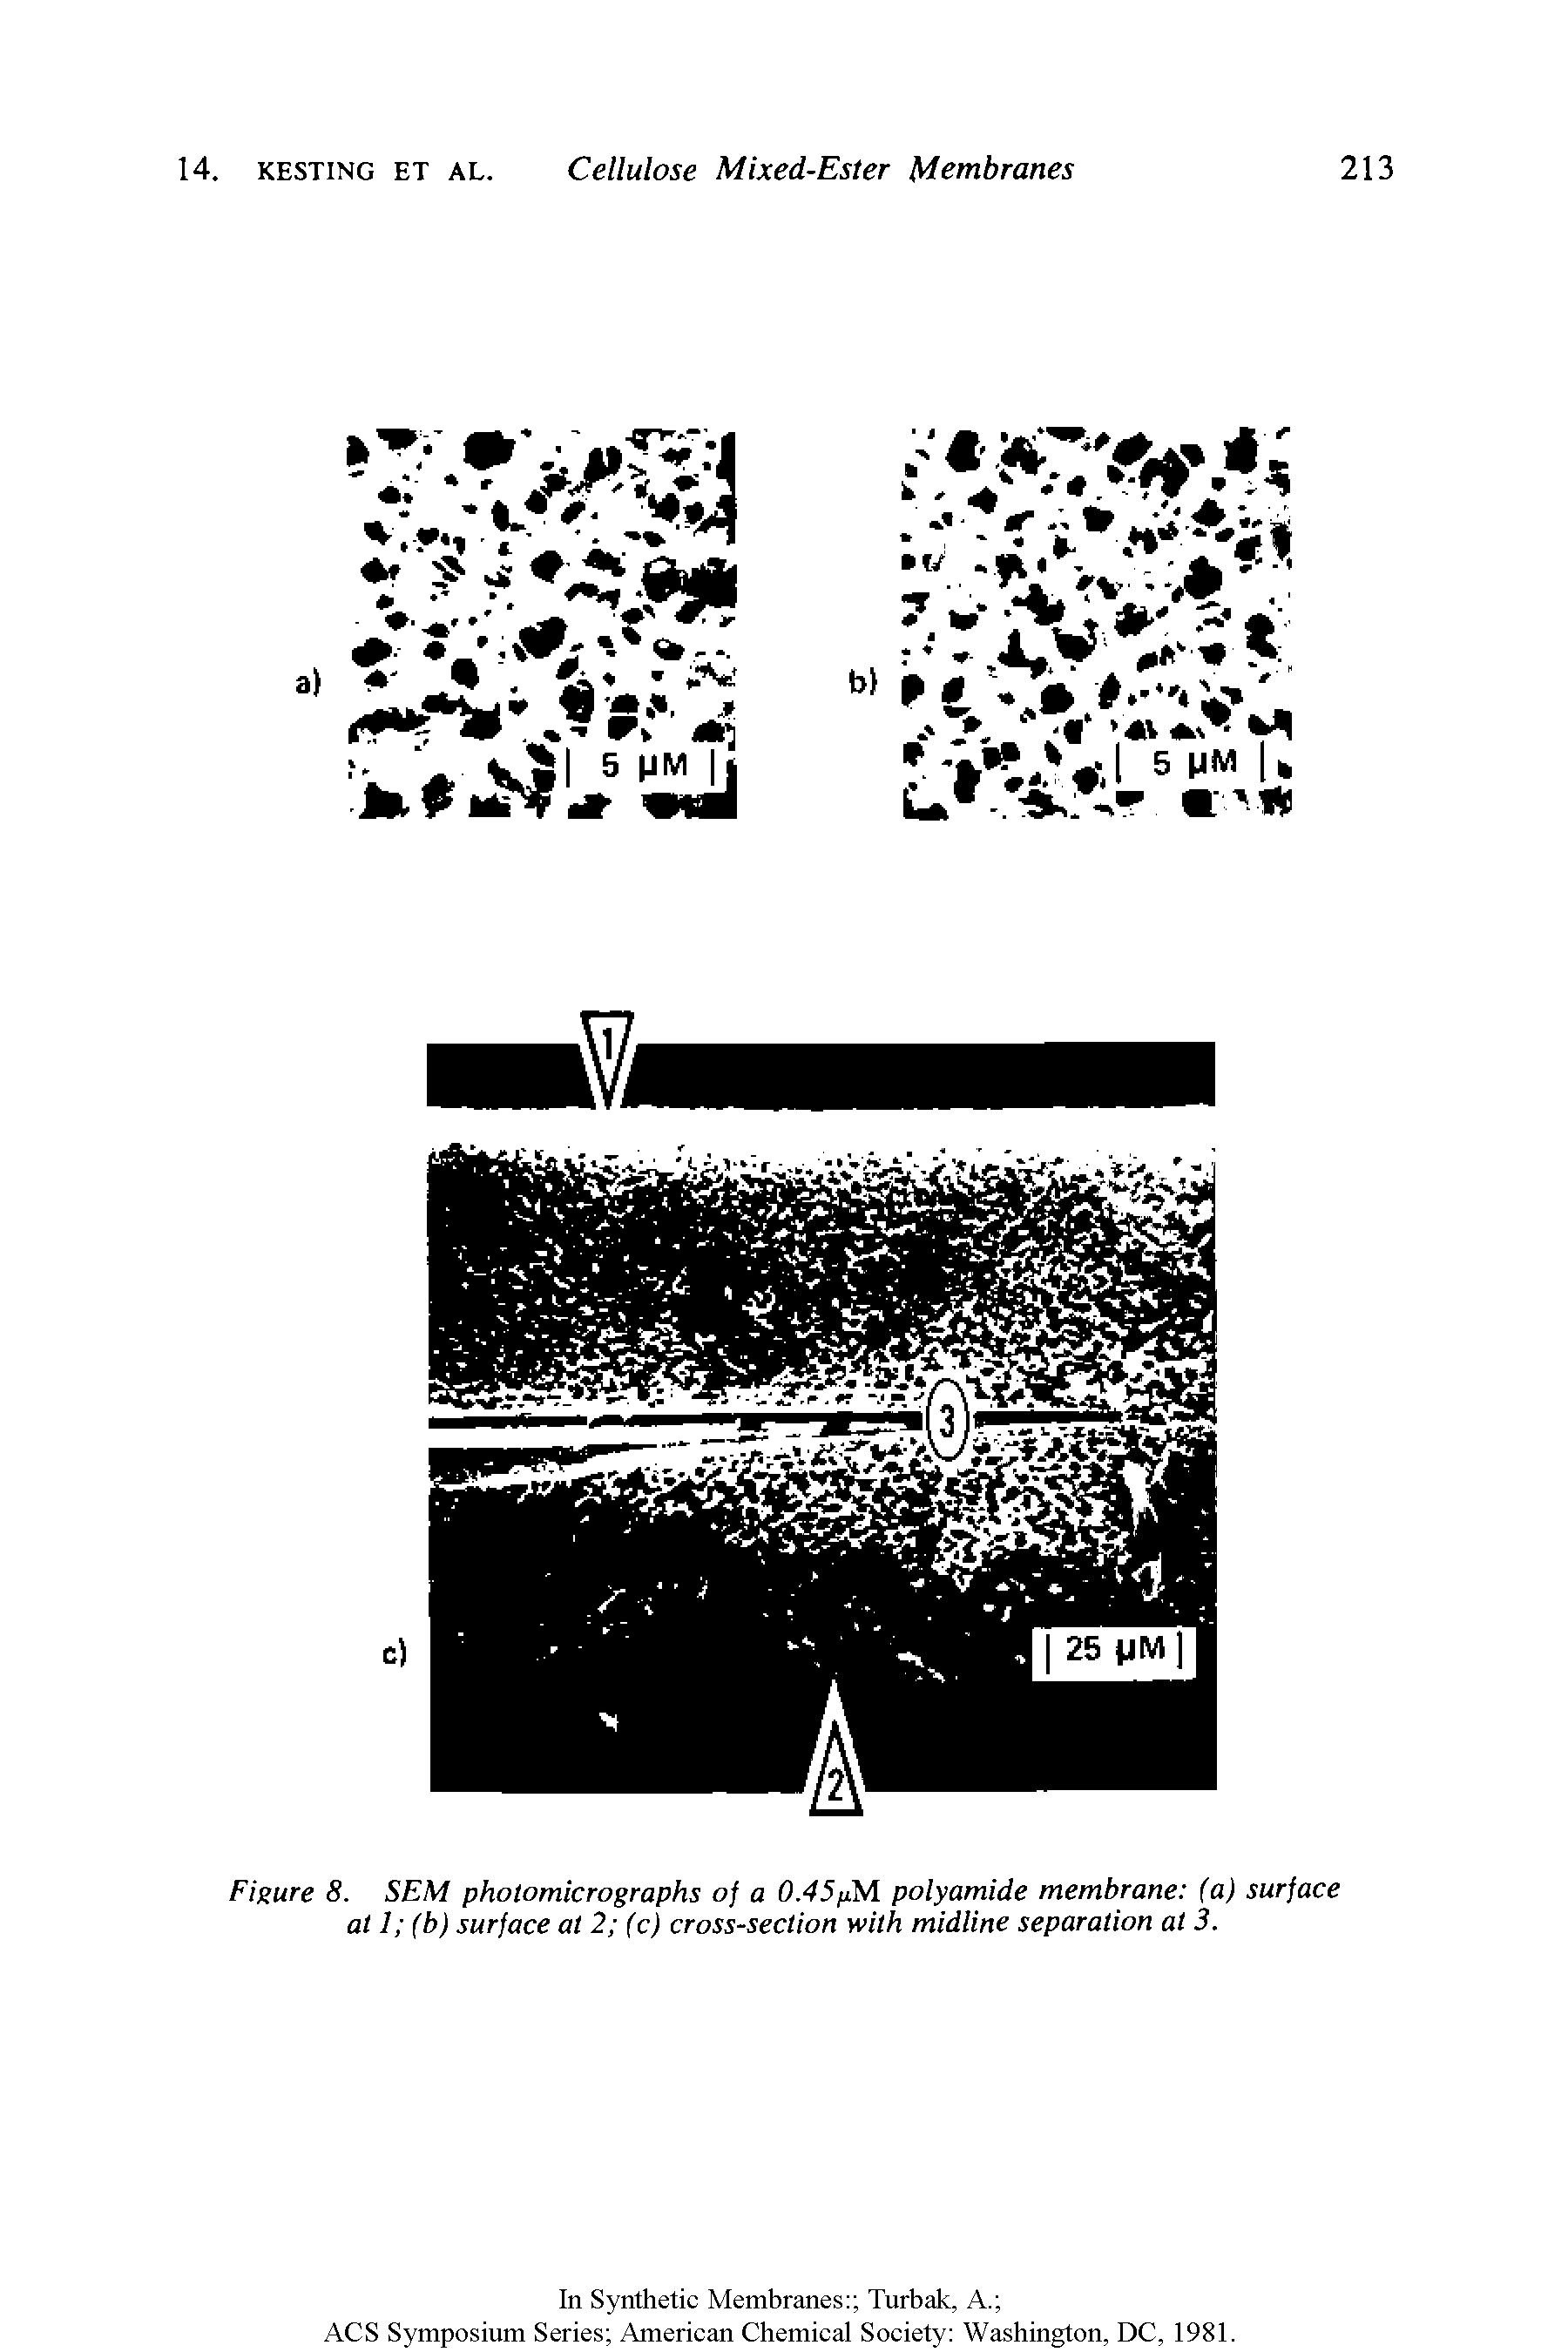 Figure 8. SEM photomicrographs of a 0.45fiM polyamide membrane (a) surface at 1 (b) surface at 2 (c) cross-section with midline separation at 3.